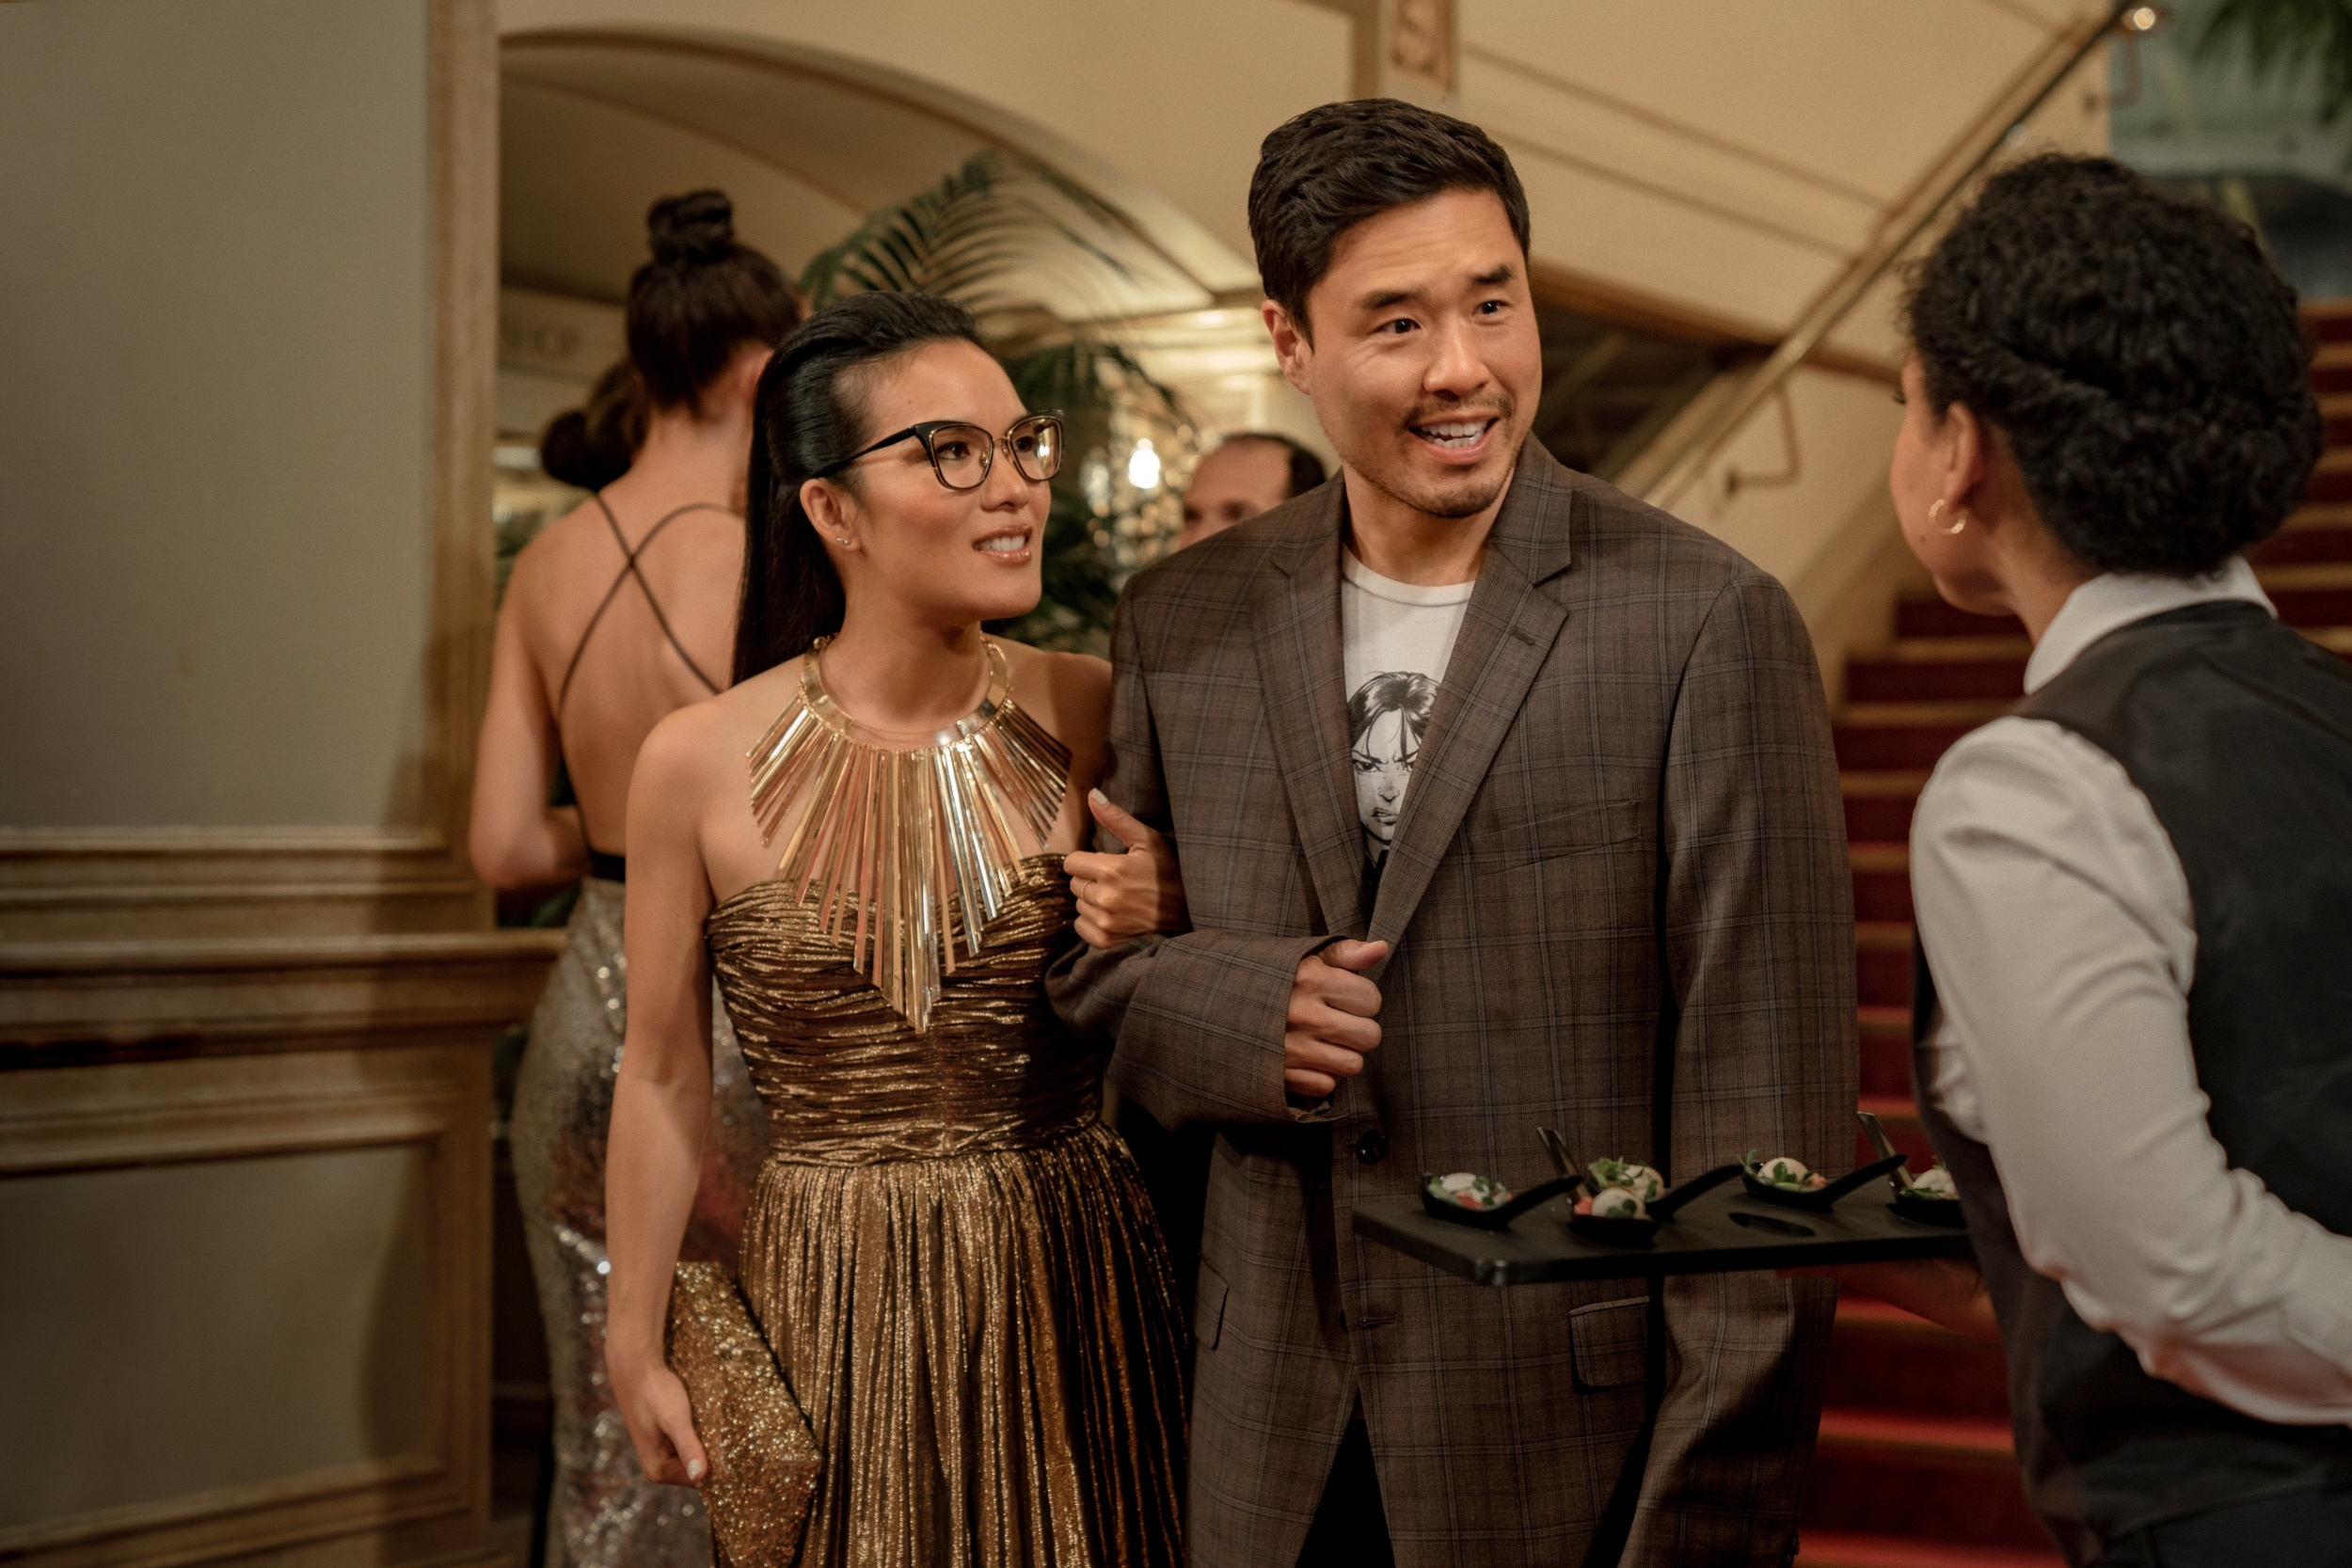 <p>Netflix has released its fair share of below-average rom-coms, but <em>Always Be My Maybe</em> is a pleasant surprise. The film follows childhood friends Sasha and Marcus, who reconnect after fifteen years. Everybody assumed they would wind up together, and now that might actually be true. Randall Park and Ali Wong are a delight together and have excellent chemistry. Keanu Reeves knocks it out of the park with a hilarious cameo role as a very exaggerated version of himself.</p><p>You may also like: <a href='https://www.yardbarker.com/entertainment/articles/these_20_films_had_crazy_unexpected_twists_022024/s1__39471164'>These 20 films had crazy, unexpected twists</a></p>